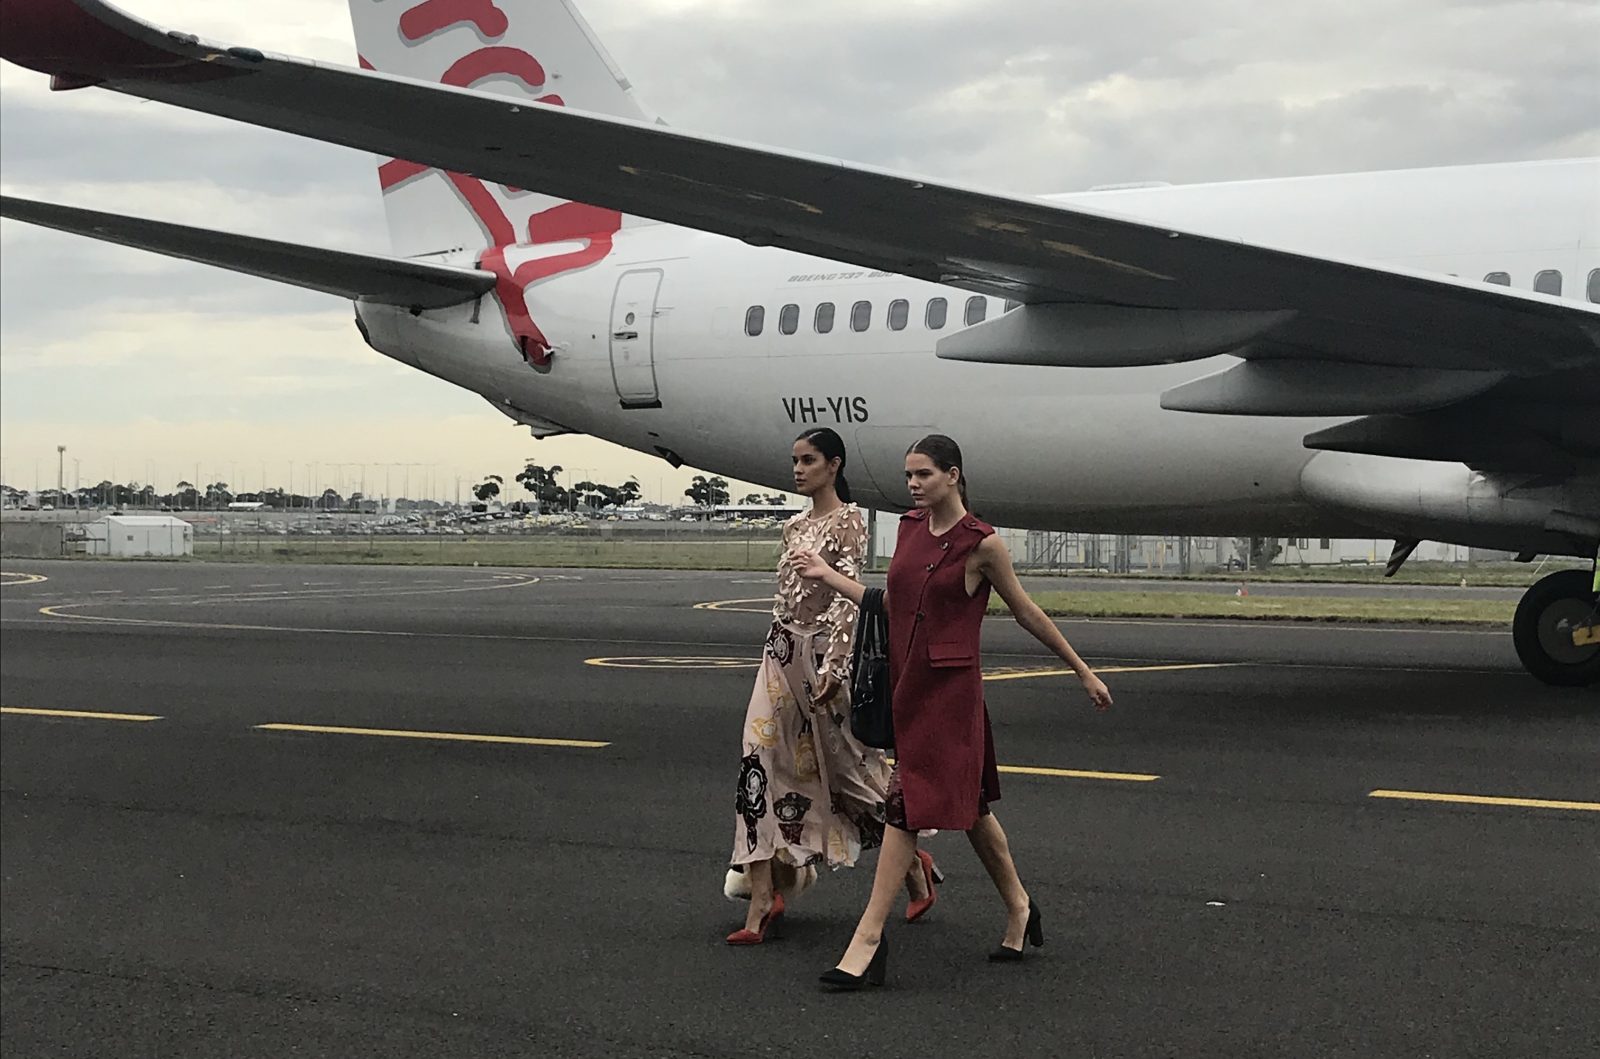 Taking Fashion to New Heights: Victoria's Secret Model Kelly Gales Teams Up With Virgin Australia